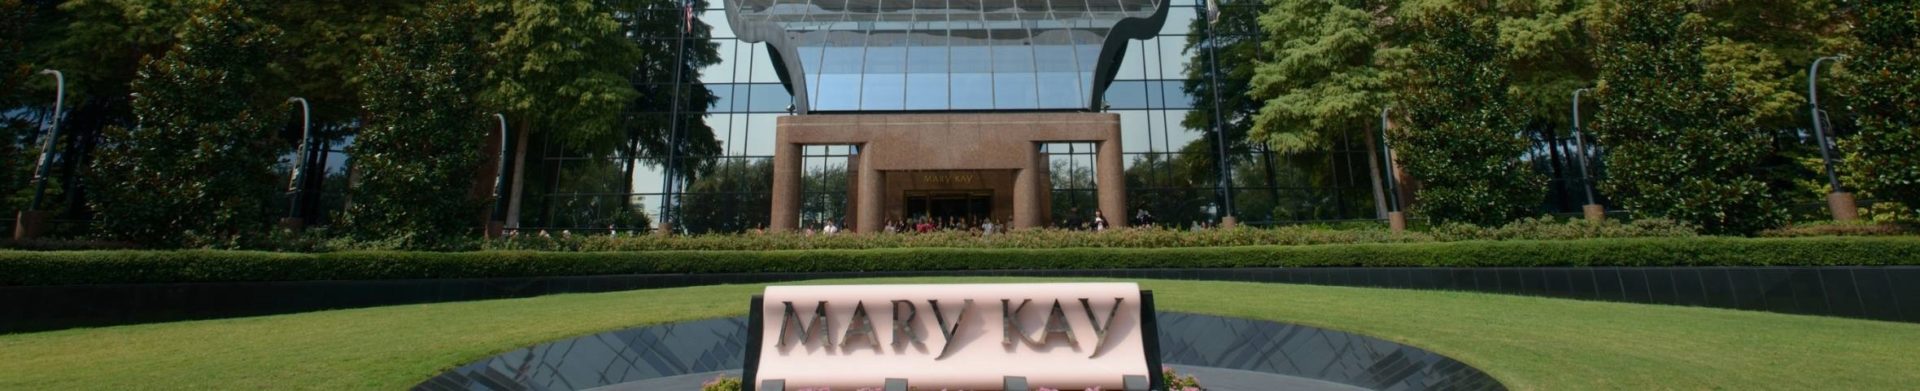 Mark Kay headquarters in the daytime